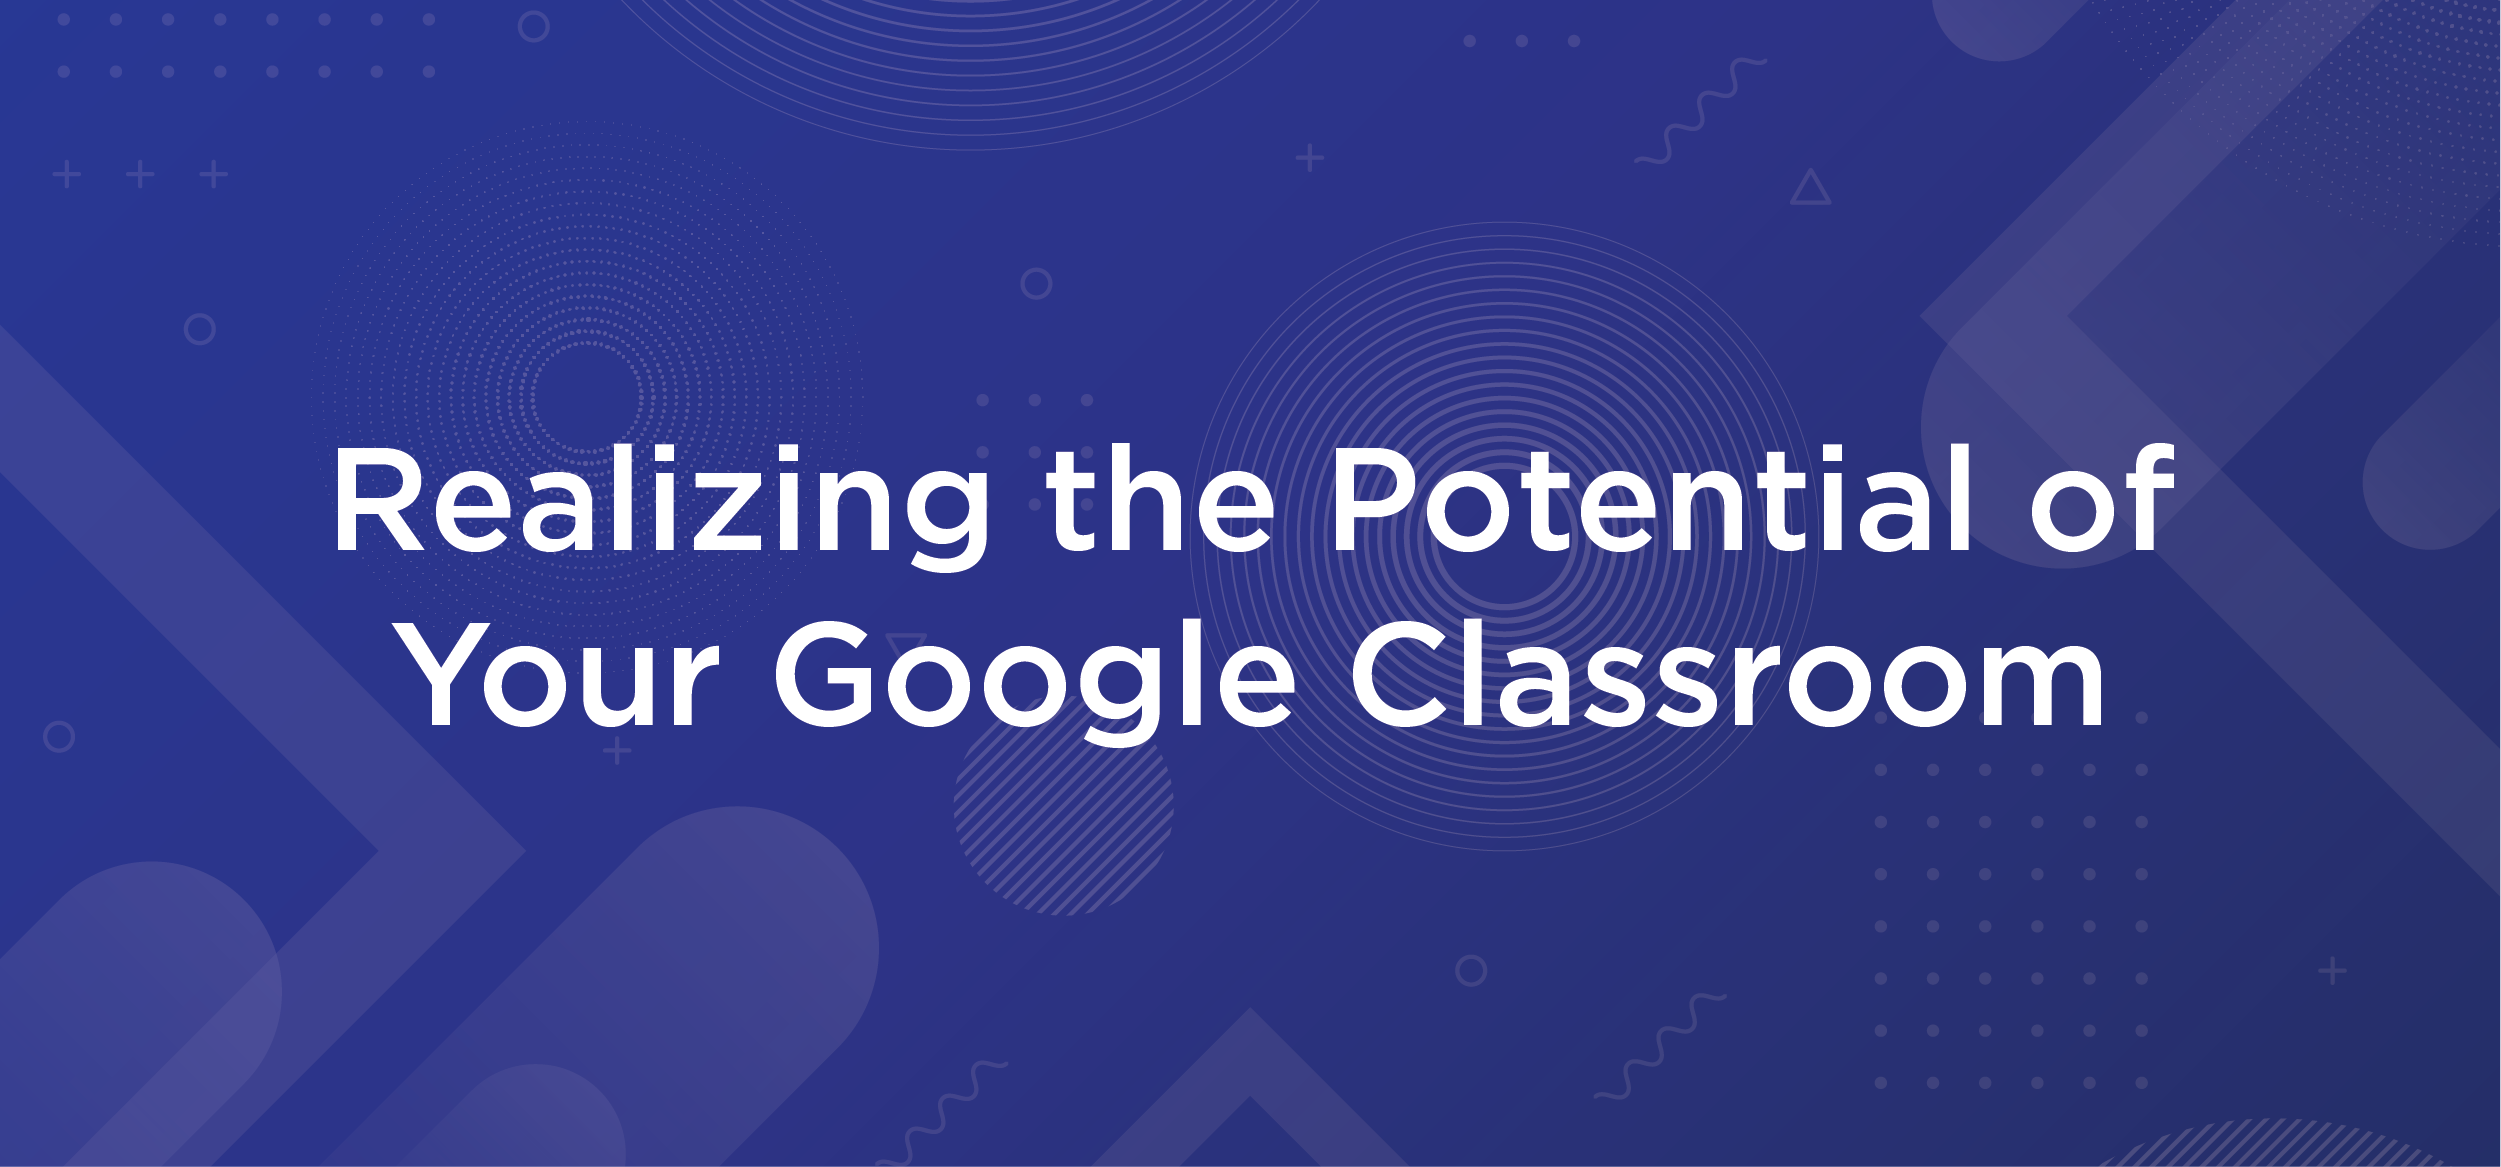 Realizing the Potential of Your Google Classroom